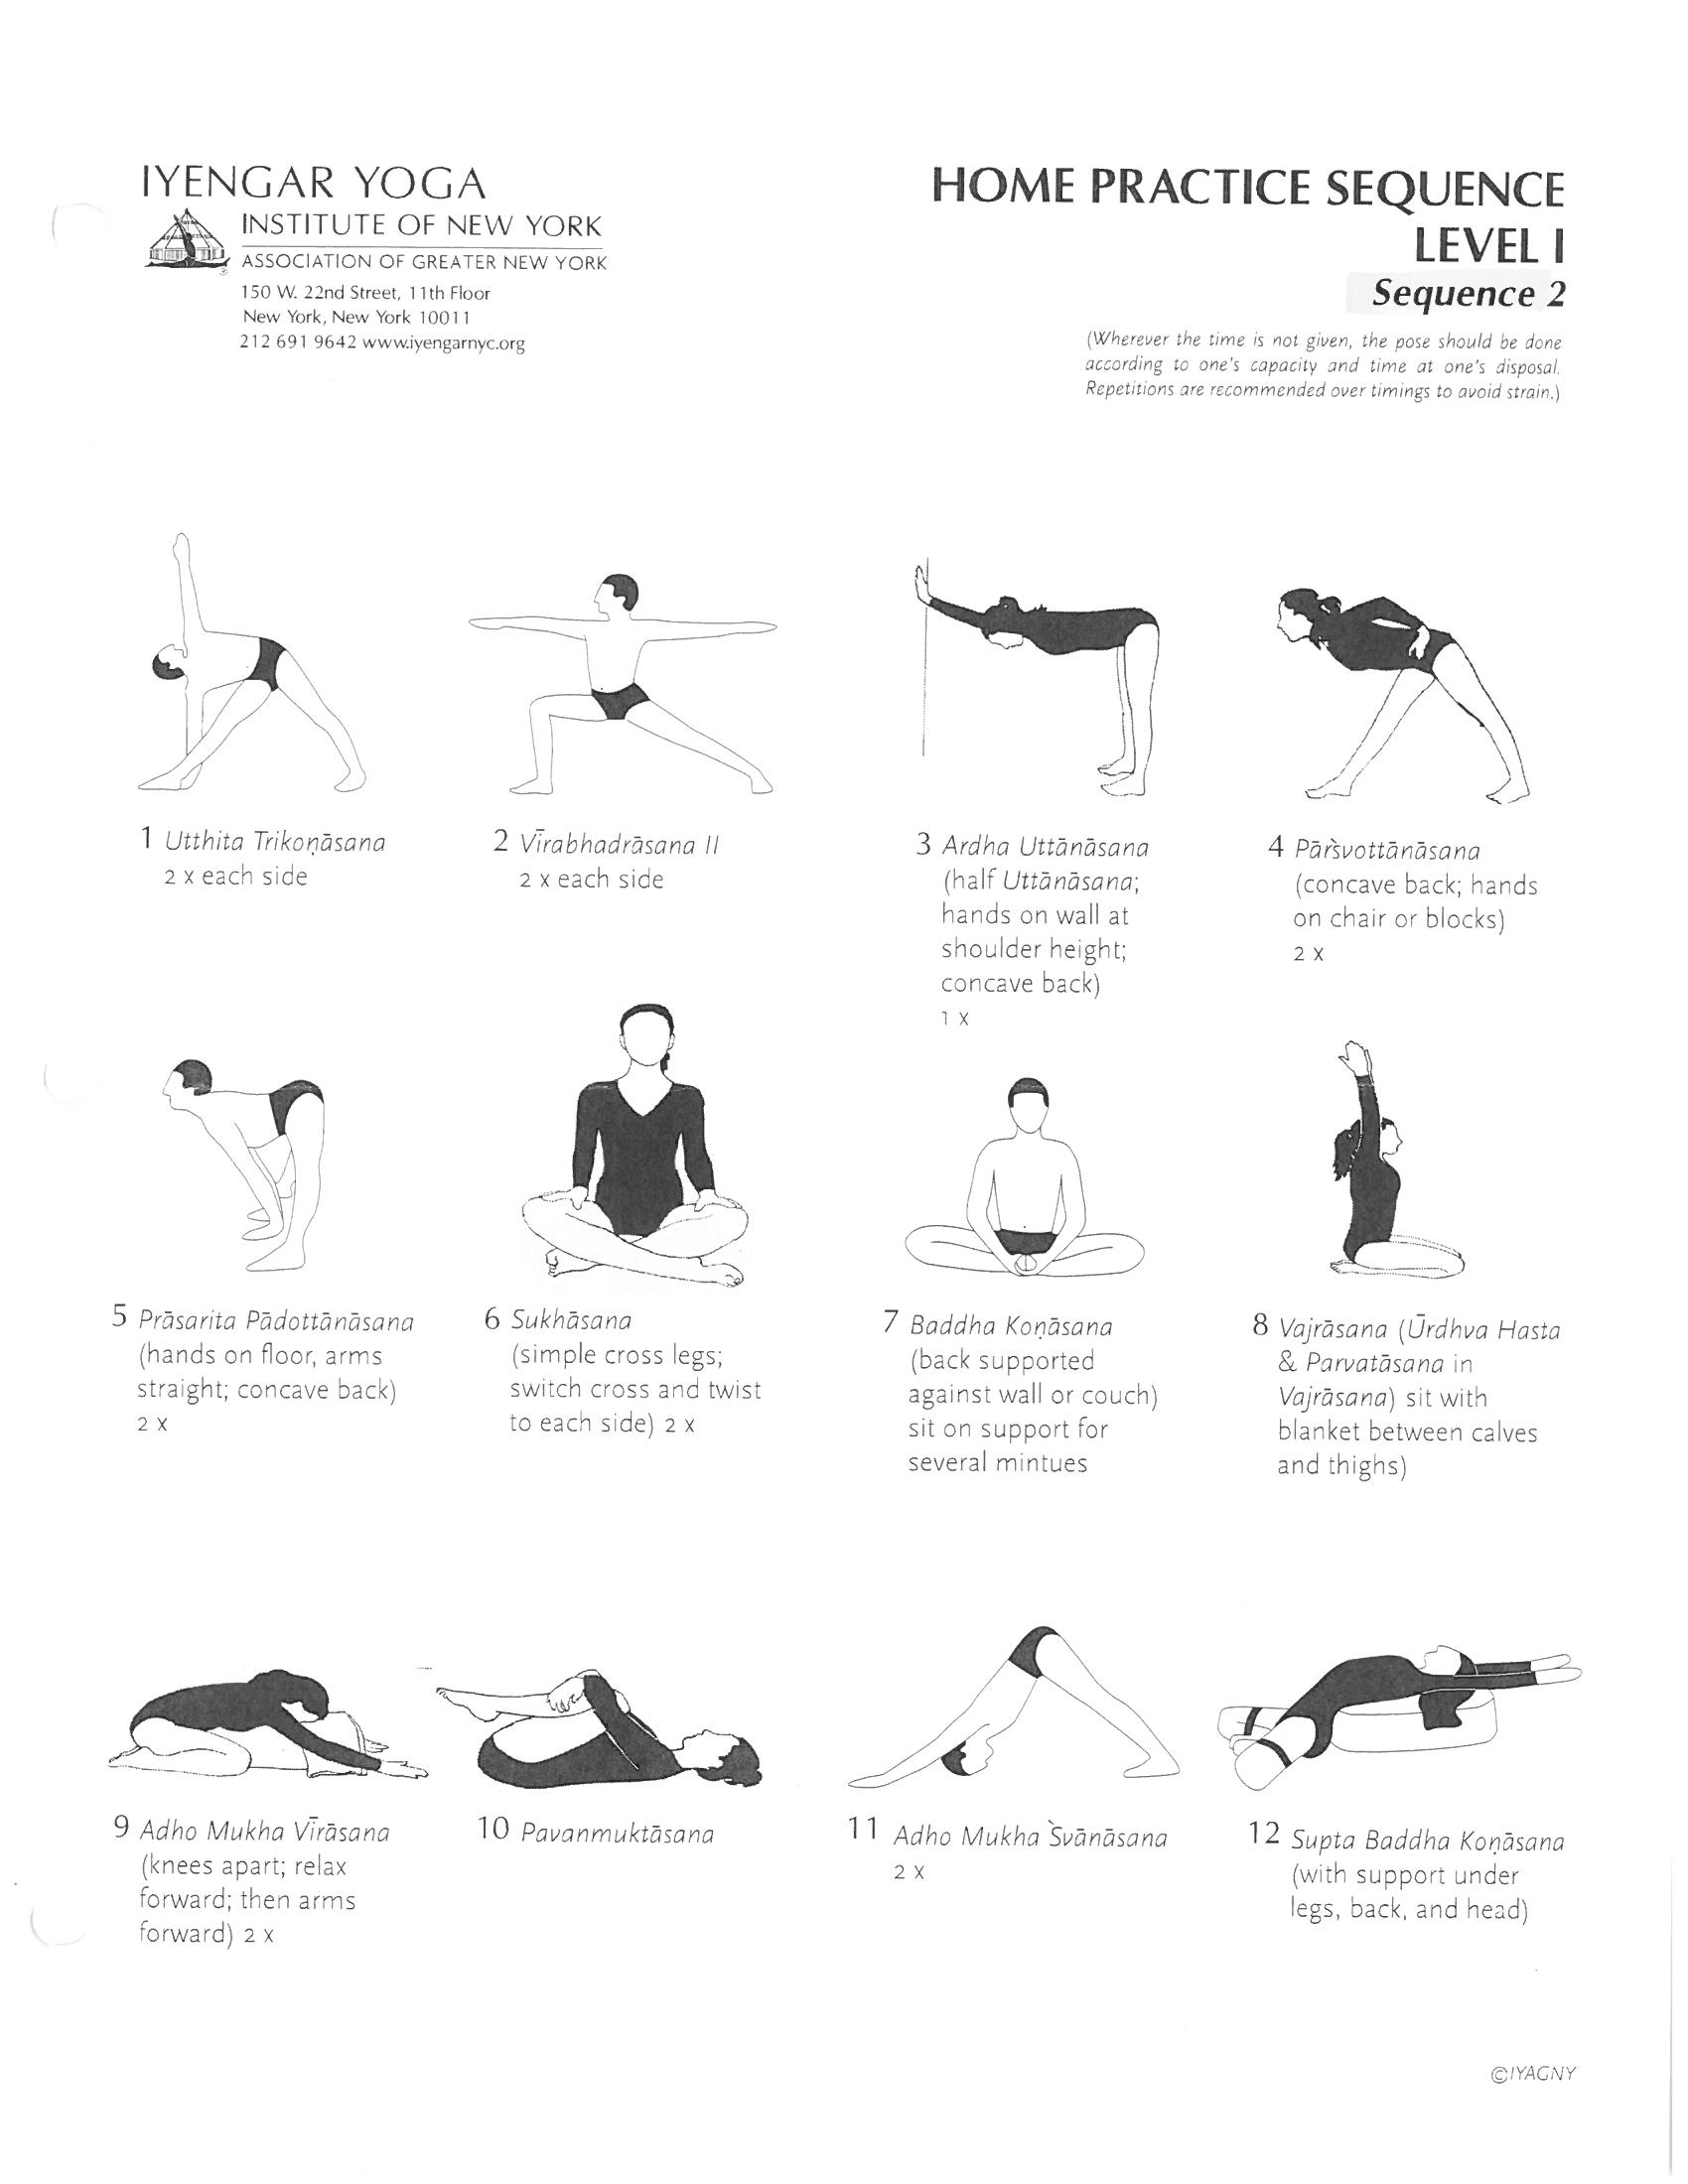 Iyengar Yoga: A Complete Beginner's Guide To Benefits & Postures